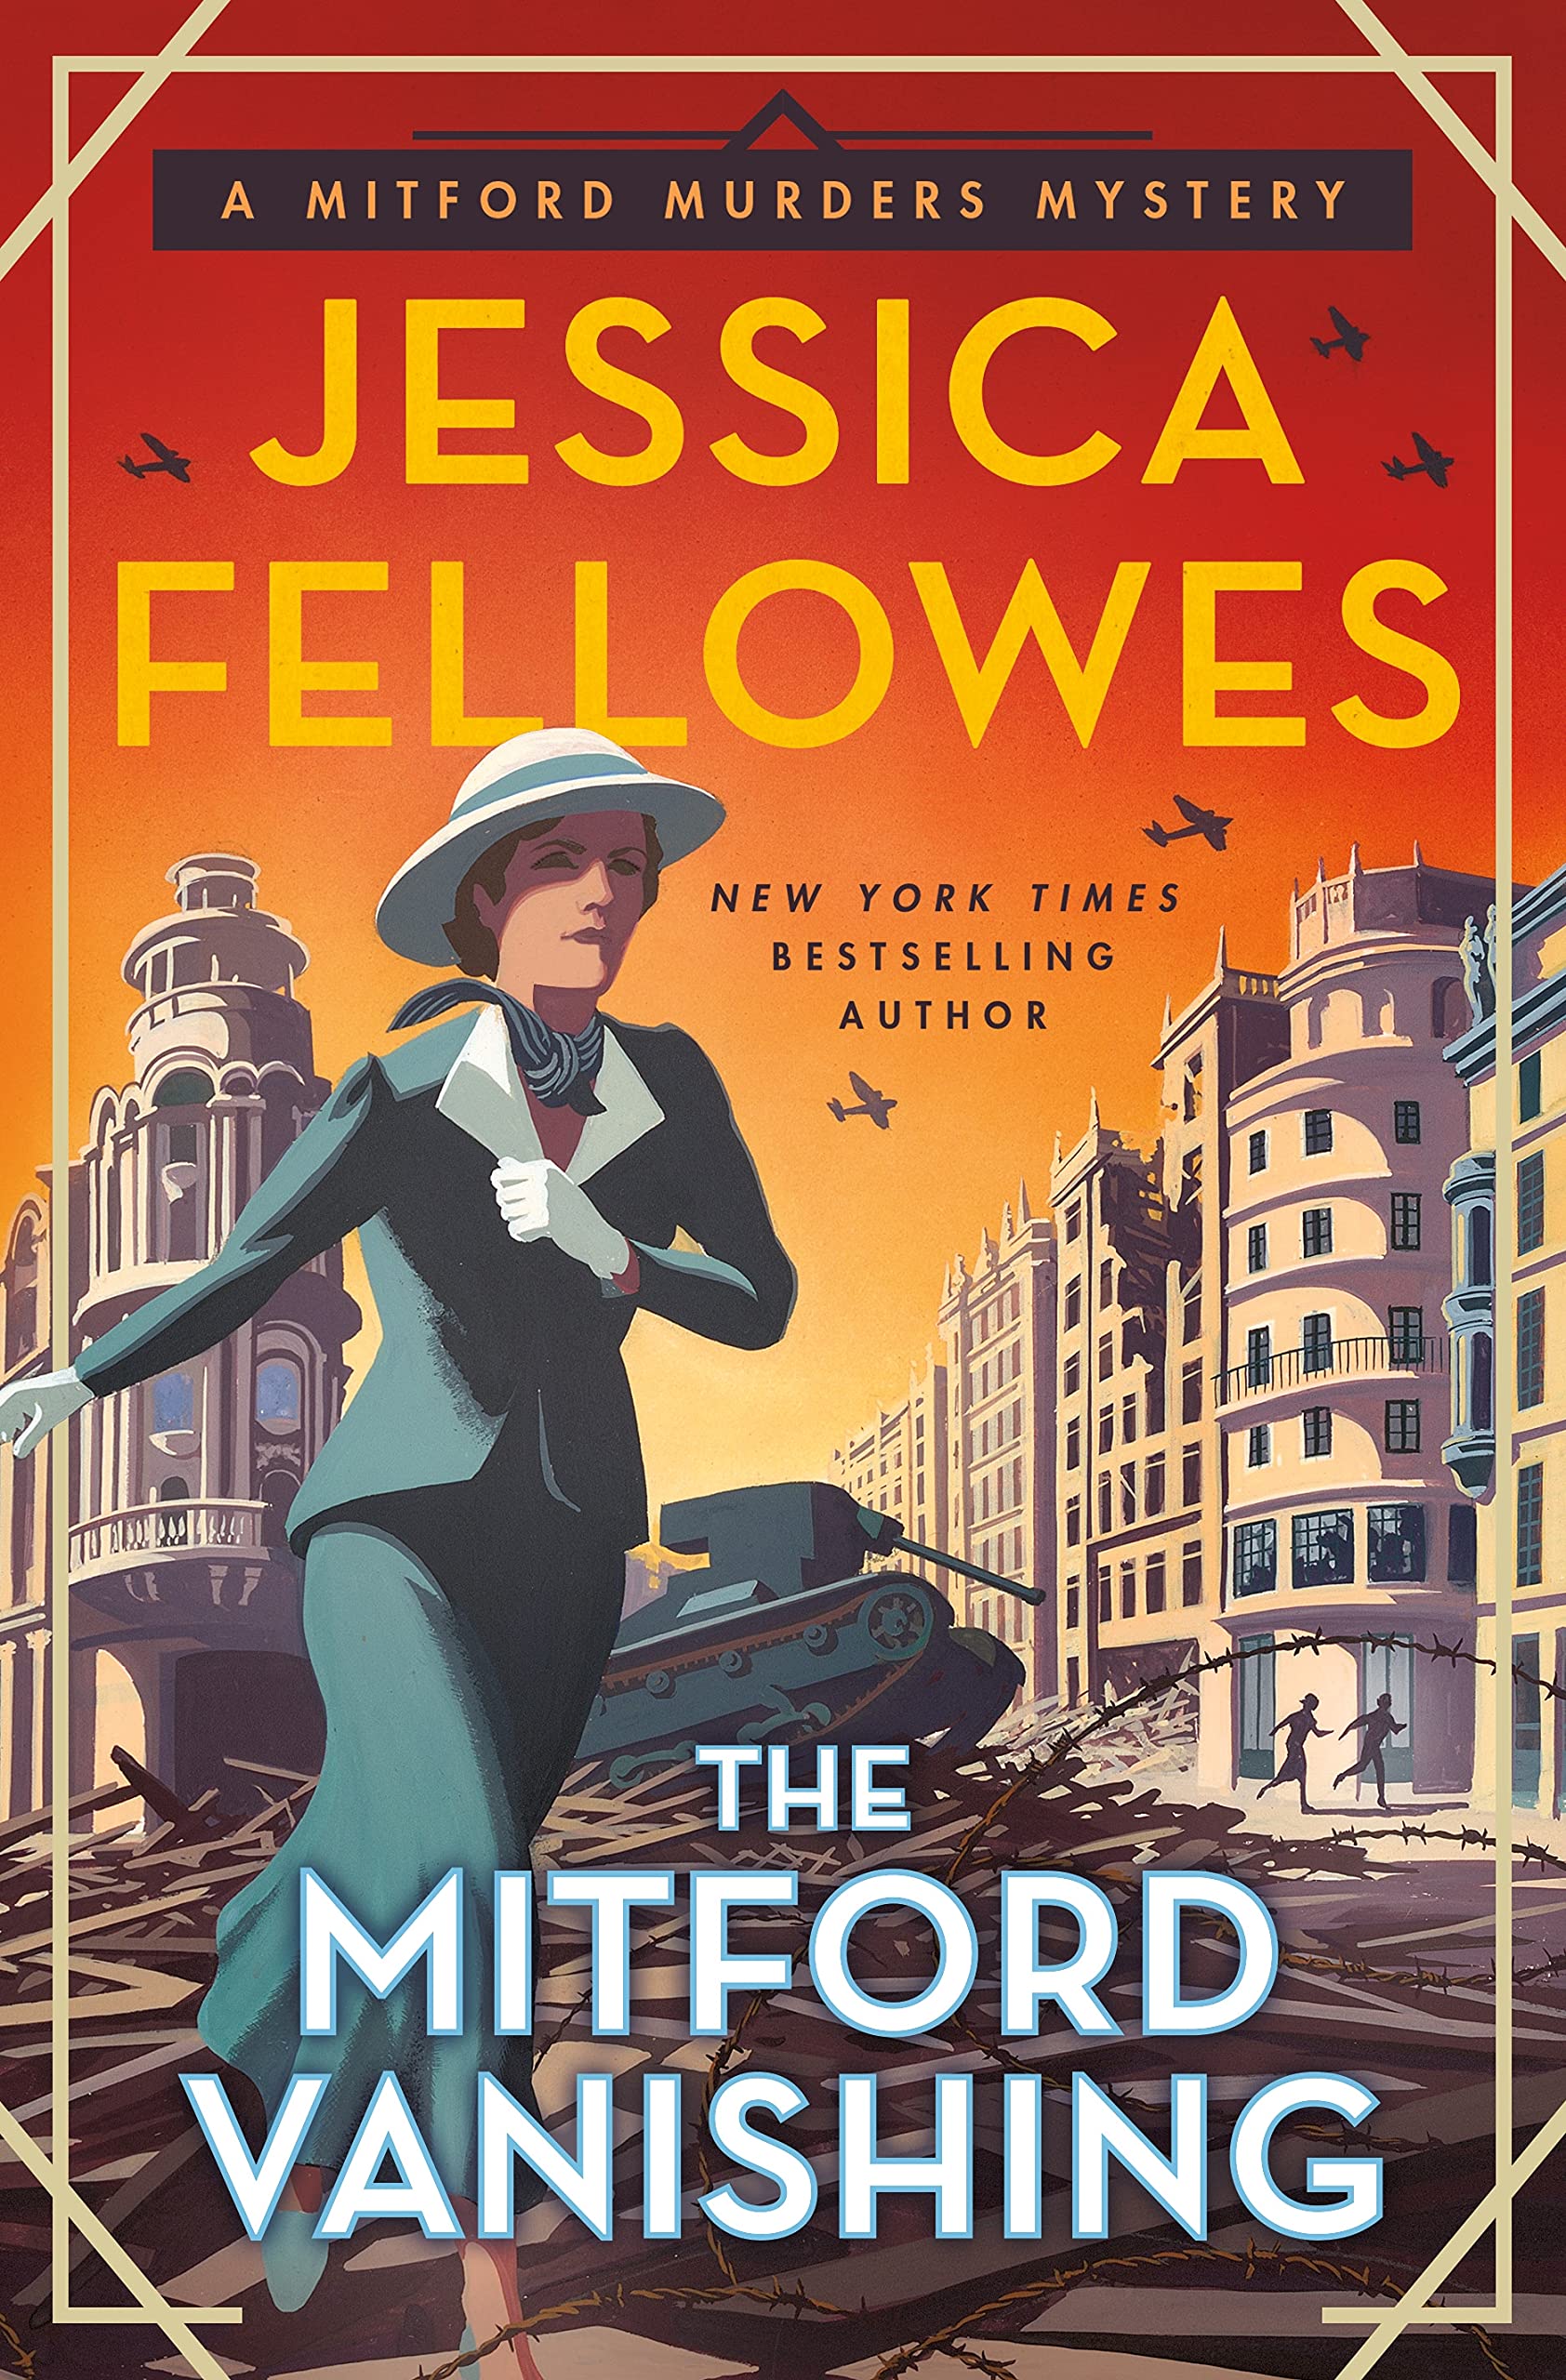 Cover image of "The Mitford Vanishing" by Jessica Fellowes.